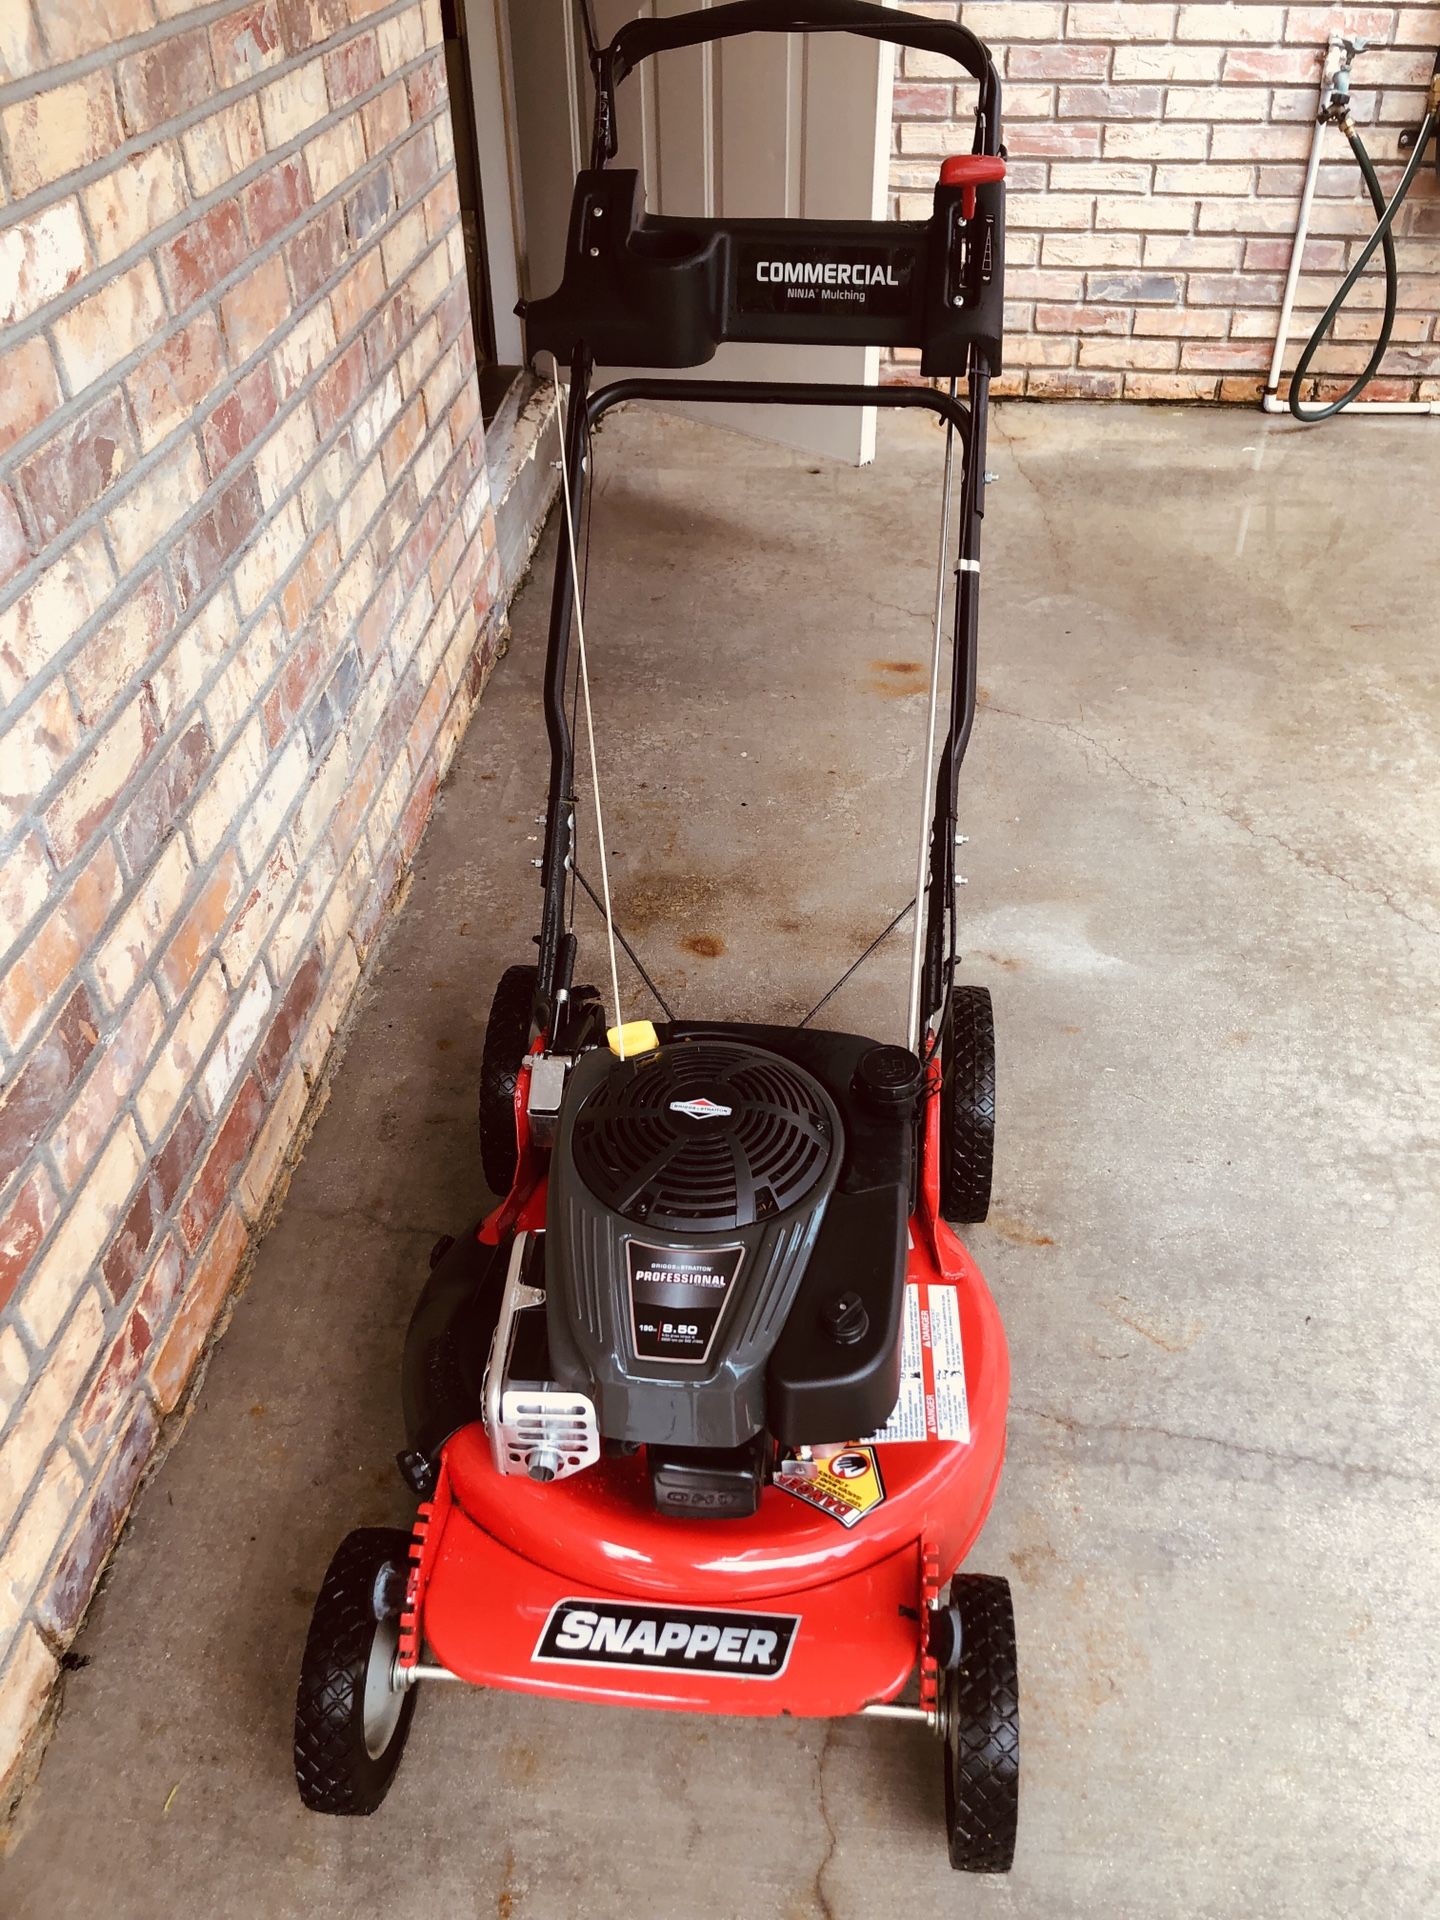 Snapper Commercial mower used 3 times